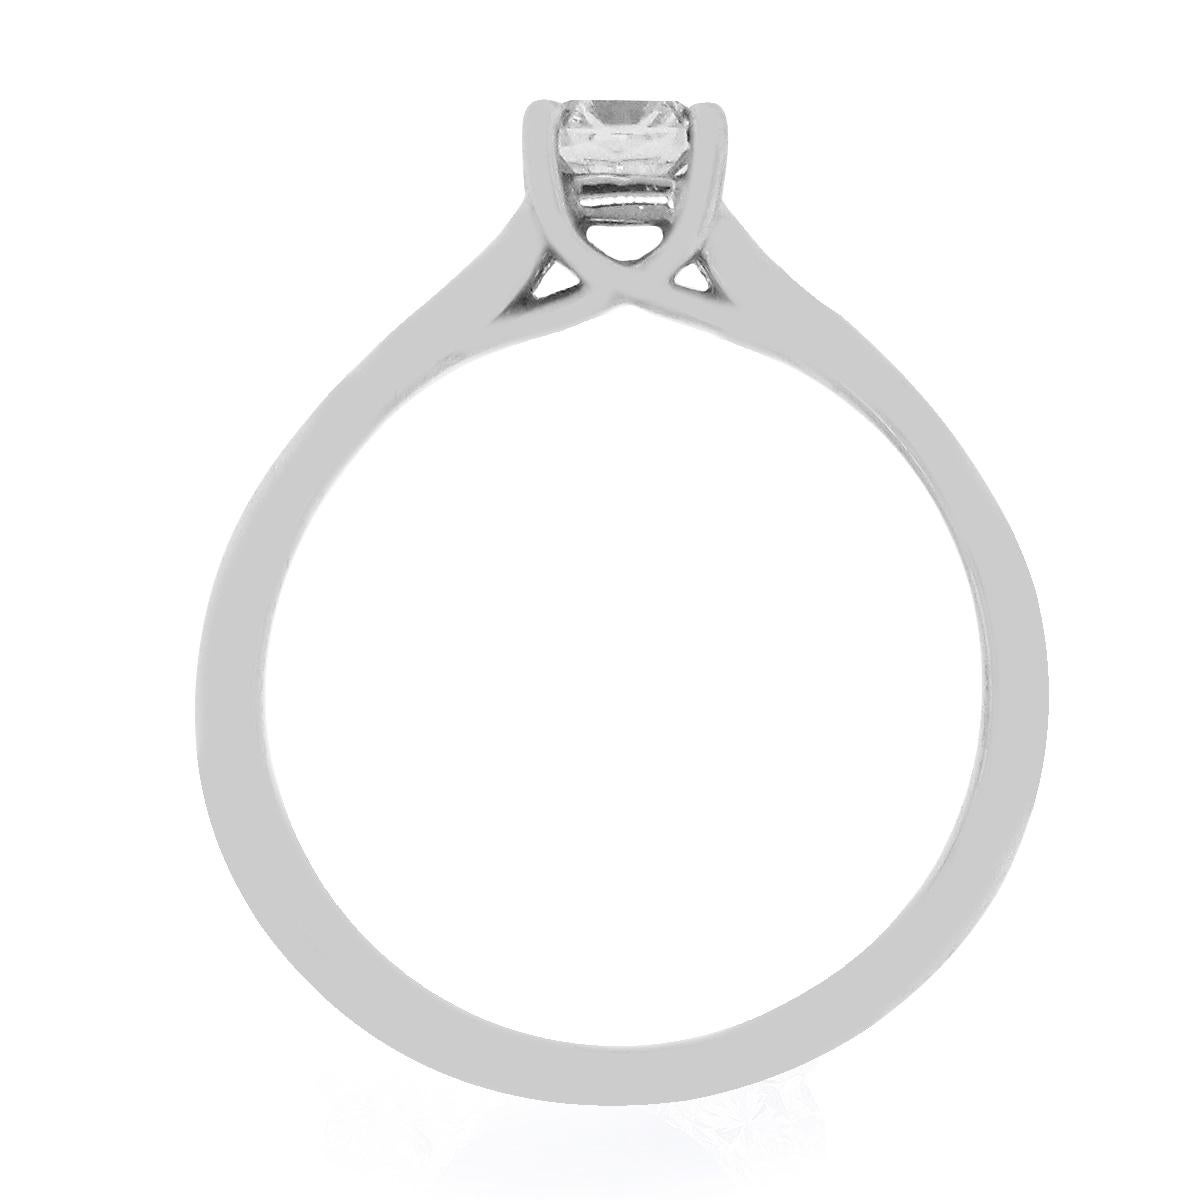 Brand: Tiffany & Co.
Material: Platinum
Diamond Details: Approximately 0.37ct diamond. Diamond is G/H in color and VS in clarity.
Ring Size: 6
Total Weight: 4.2g (2.7dwt)
Measurements: 0.77